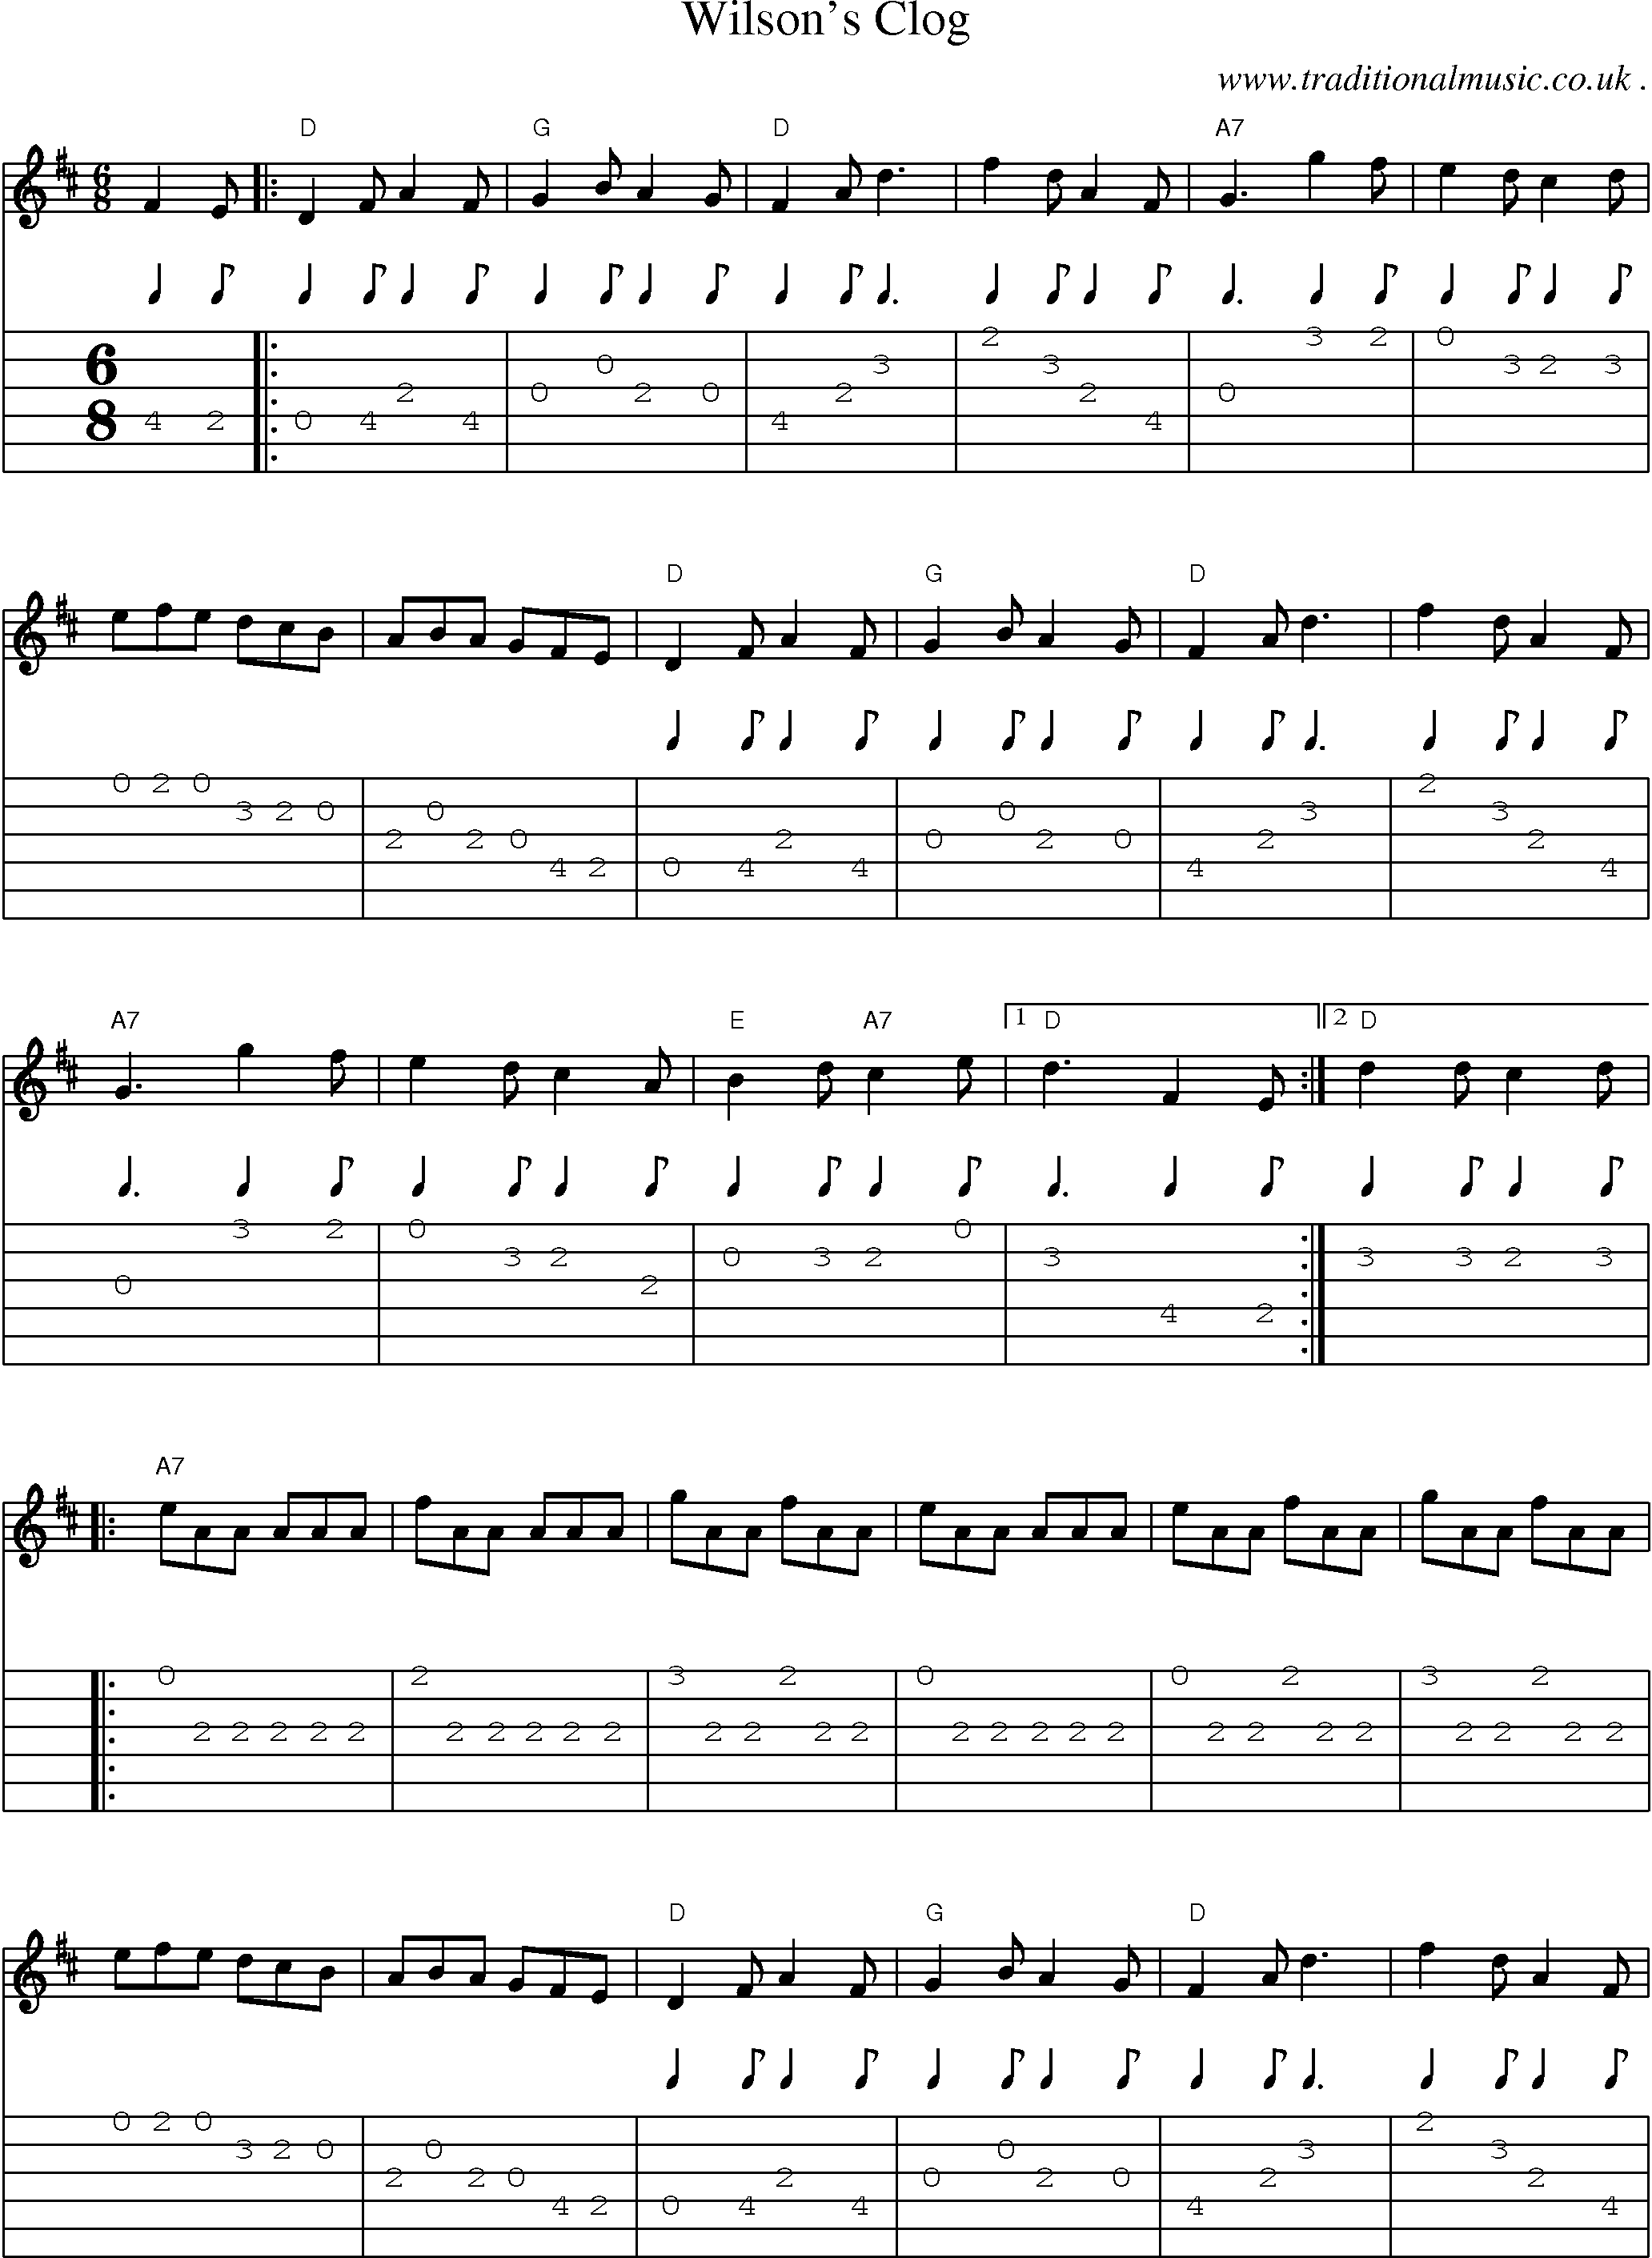 Sheet-Music and Guitar Tabs for Wilsons Clog